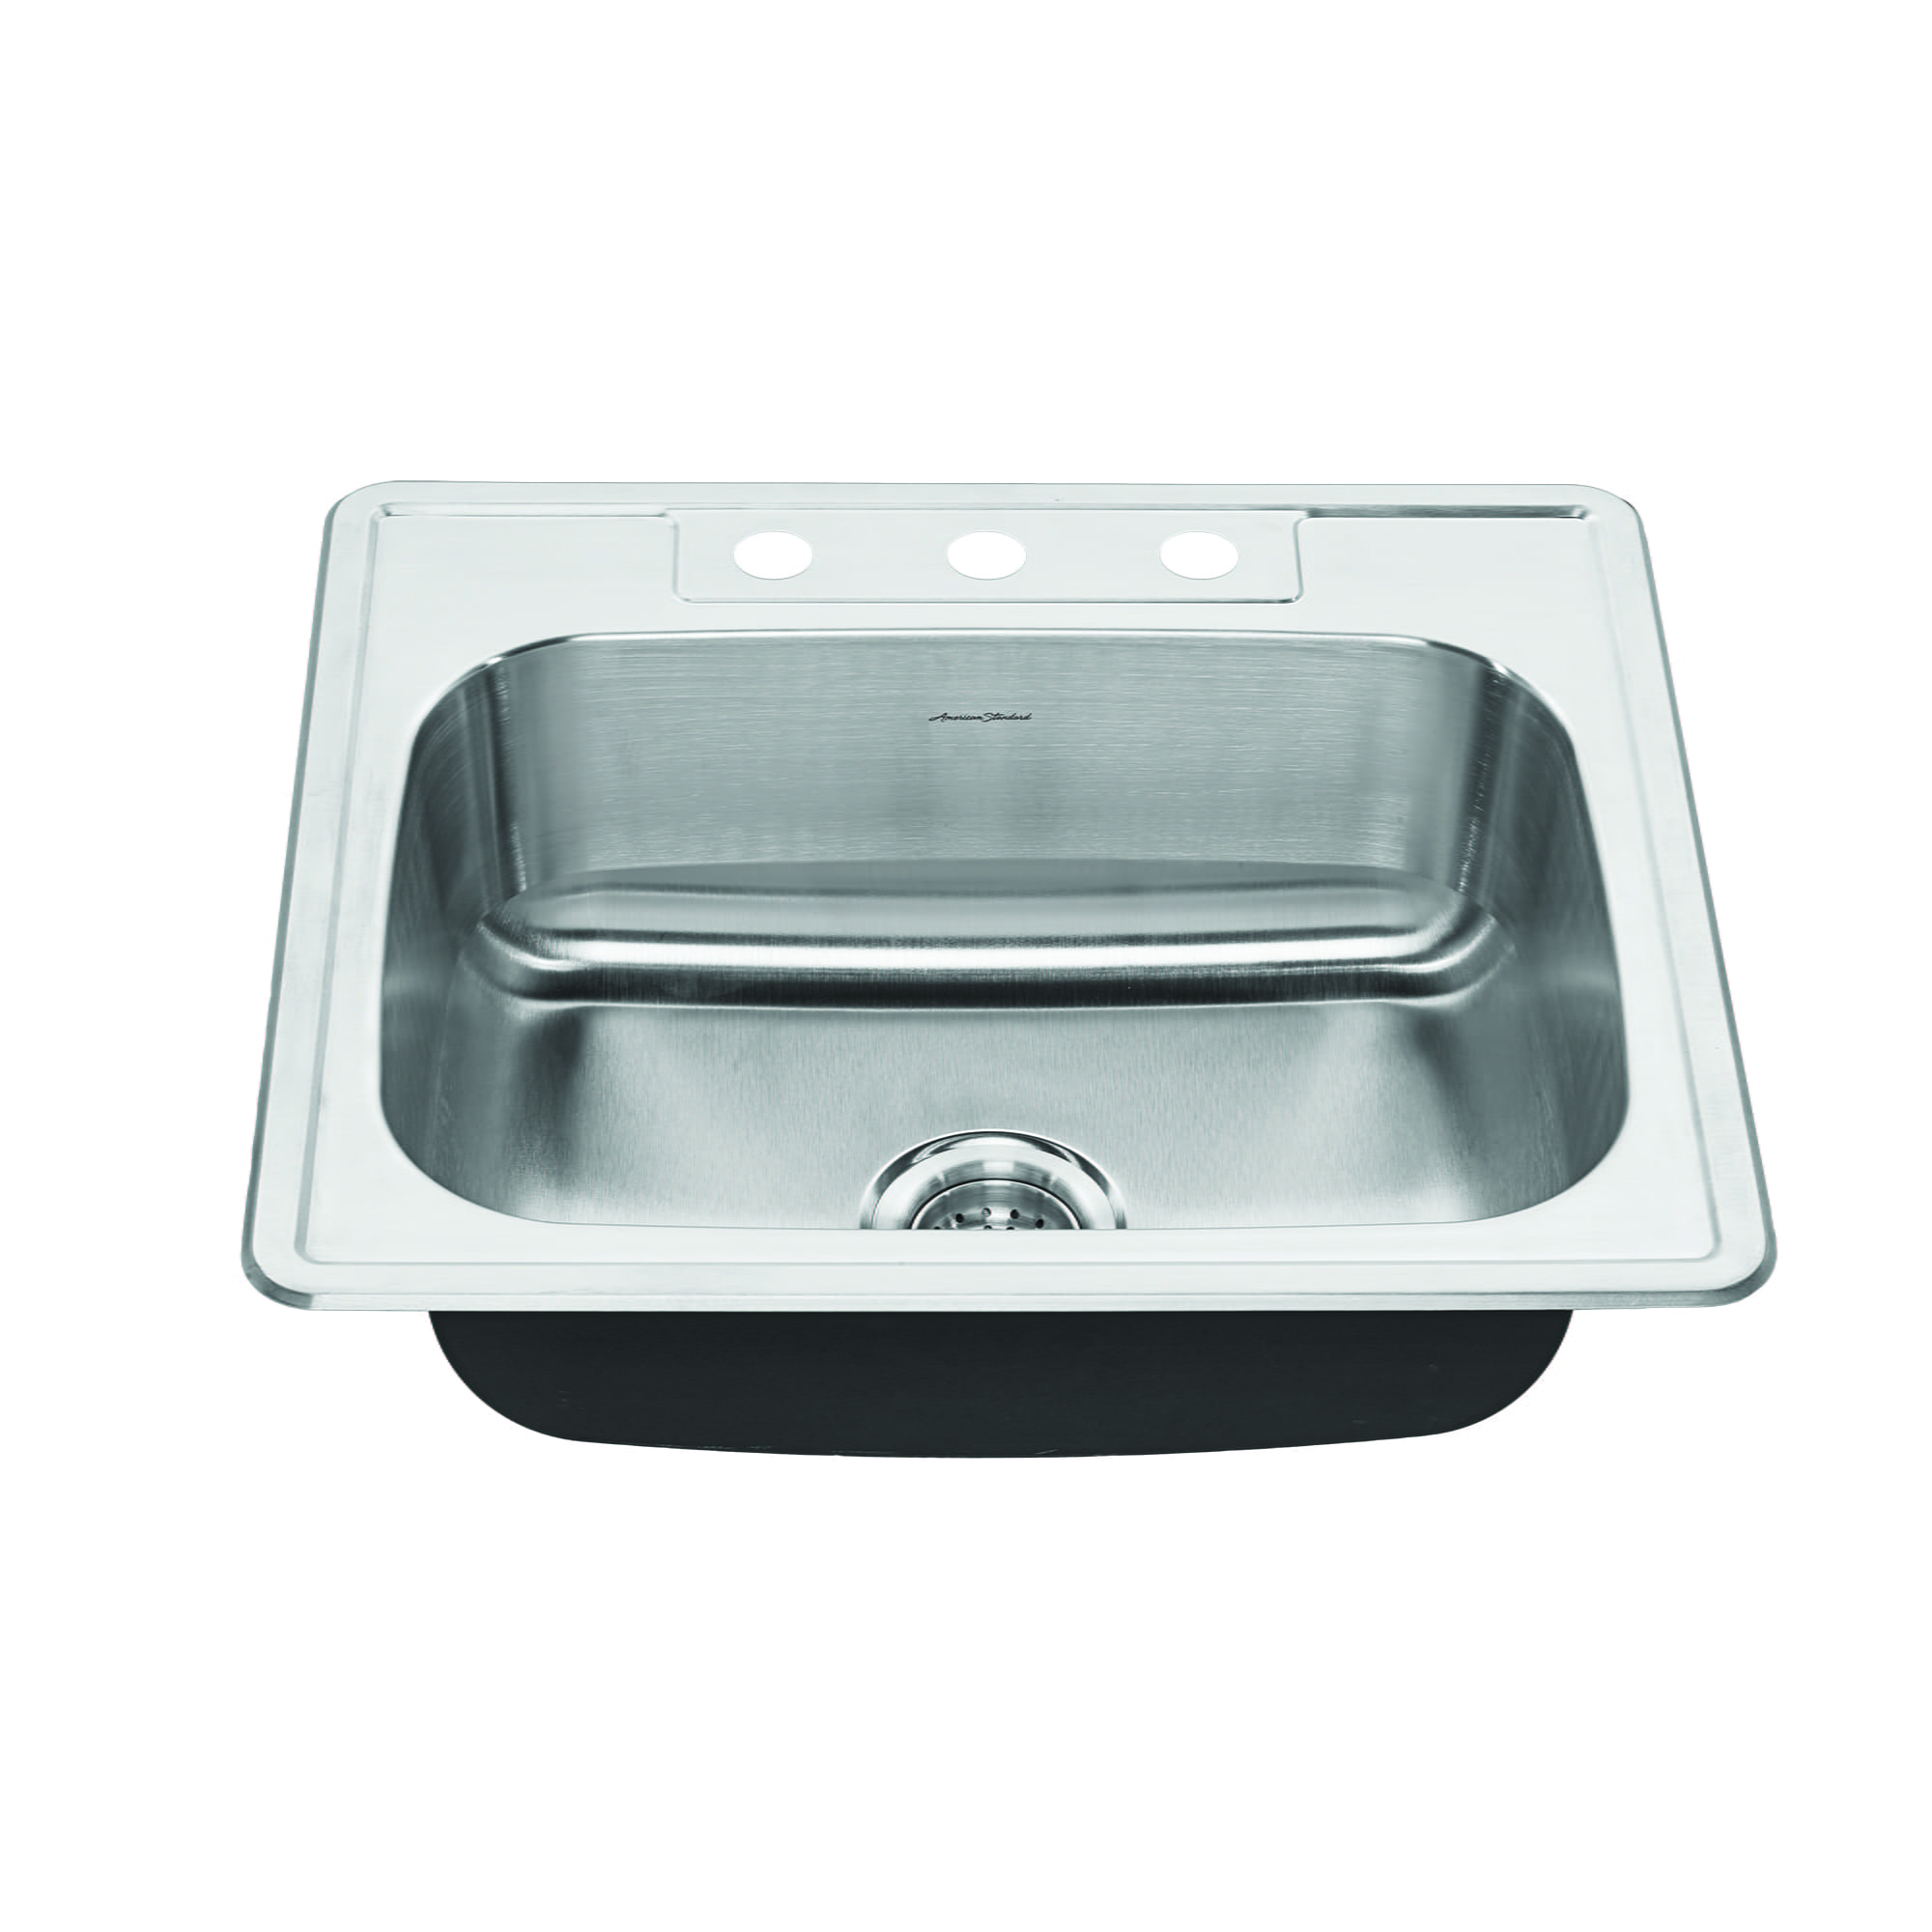 Colony® 25 x 22-Inch Stainless Steel 3-Hole Top Mount Single Bowl Kitchen Sink